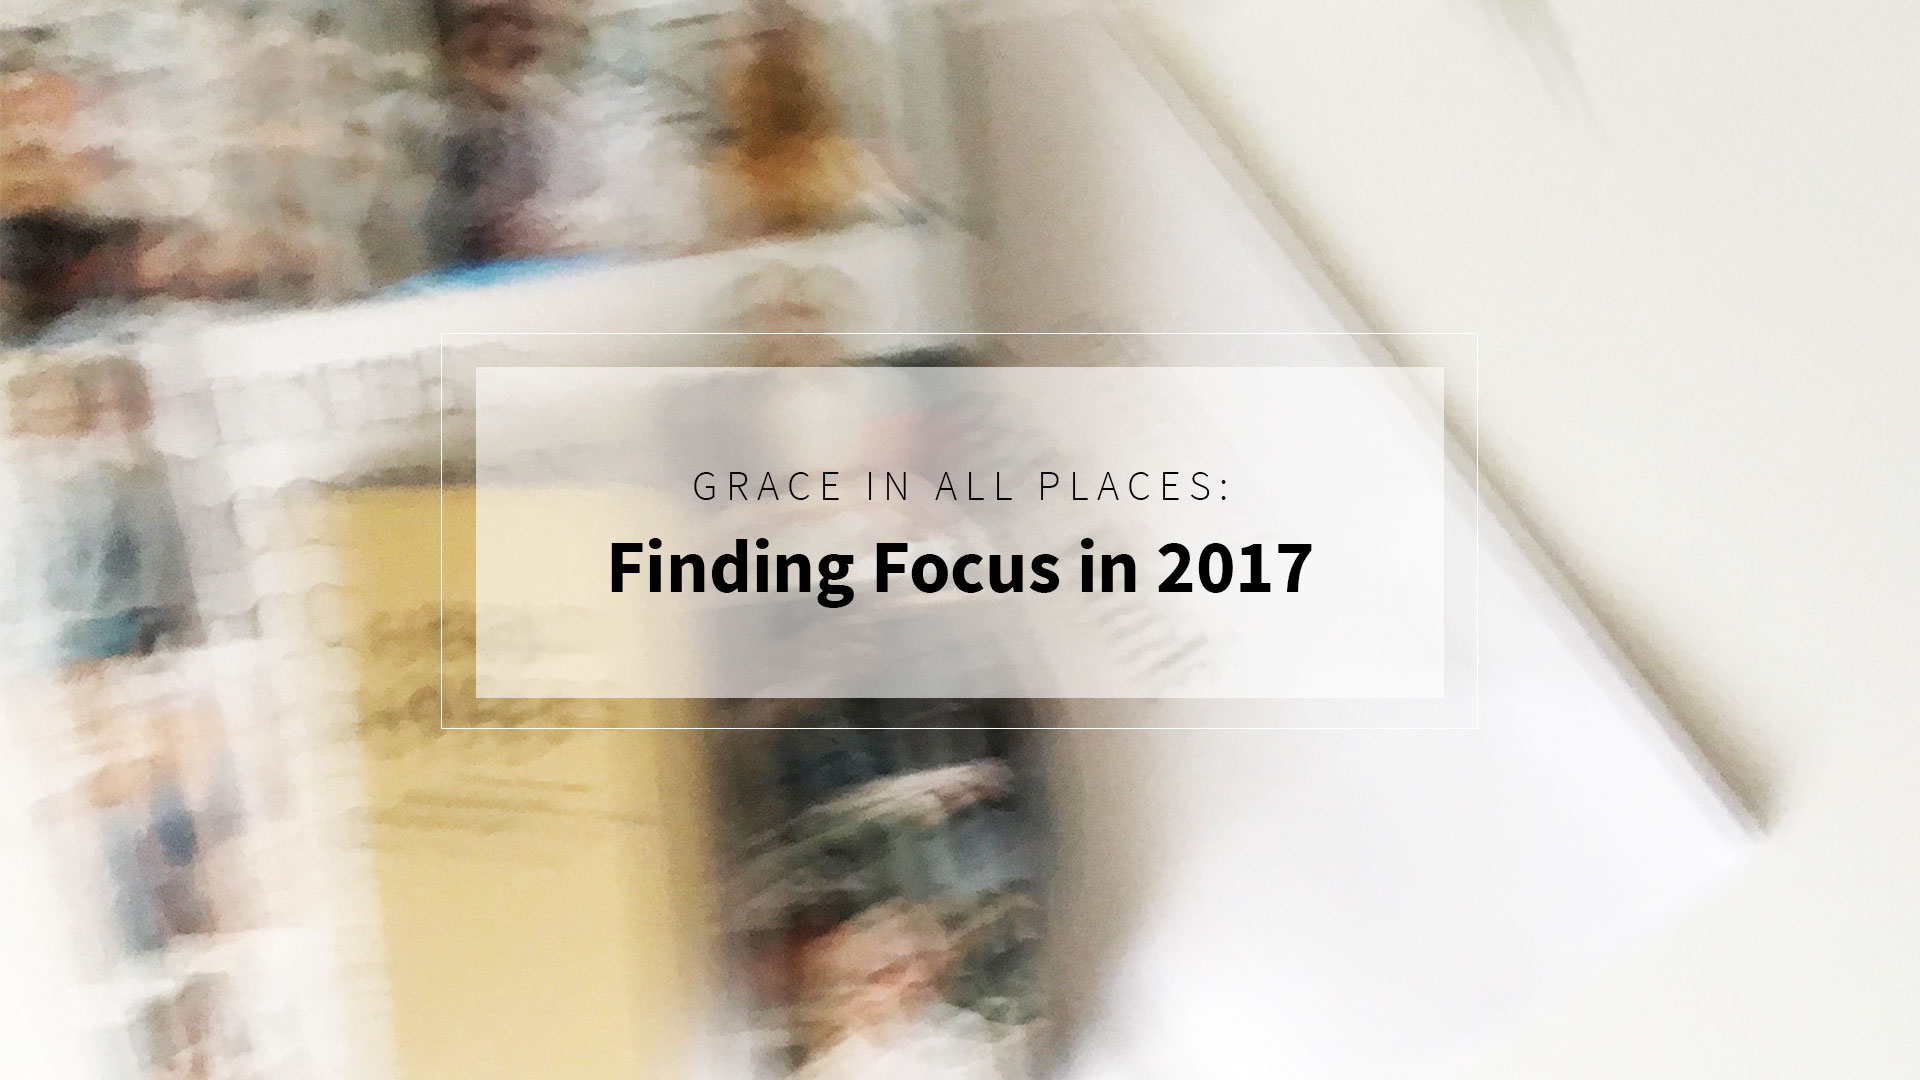 Grace in all places: Finding Focus in 2017